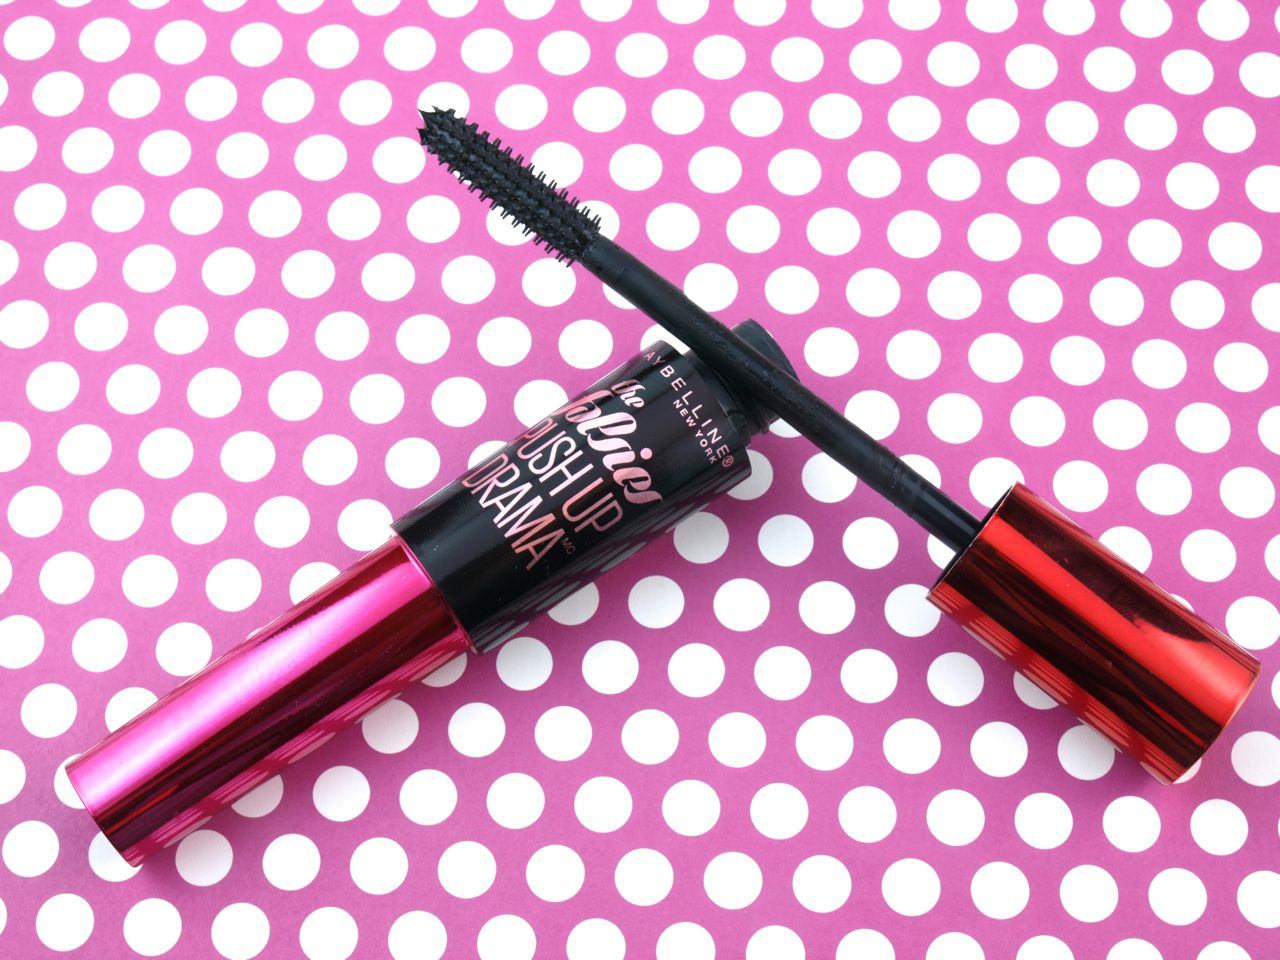 Maybelline The Falsies Push Up Drama Mascara: Review and Swatches